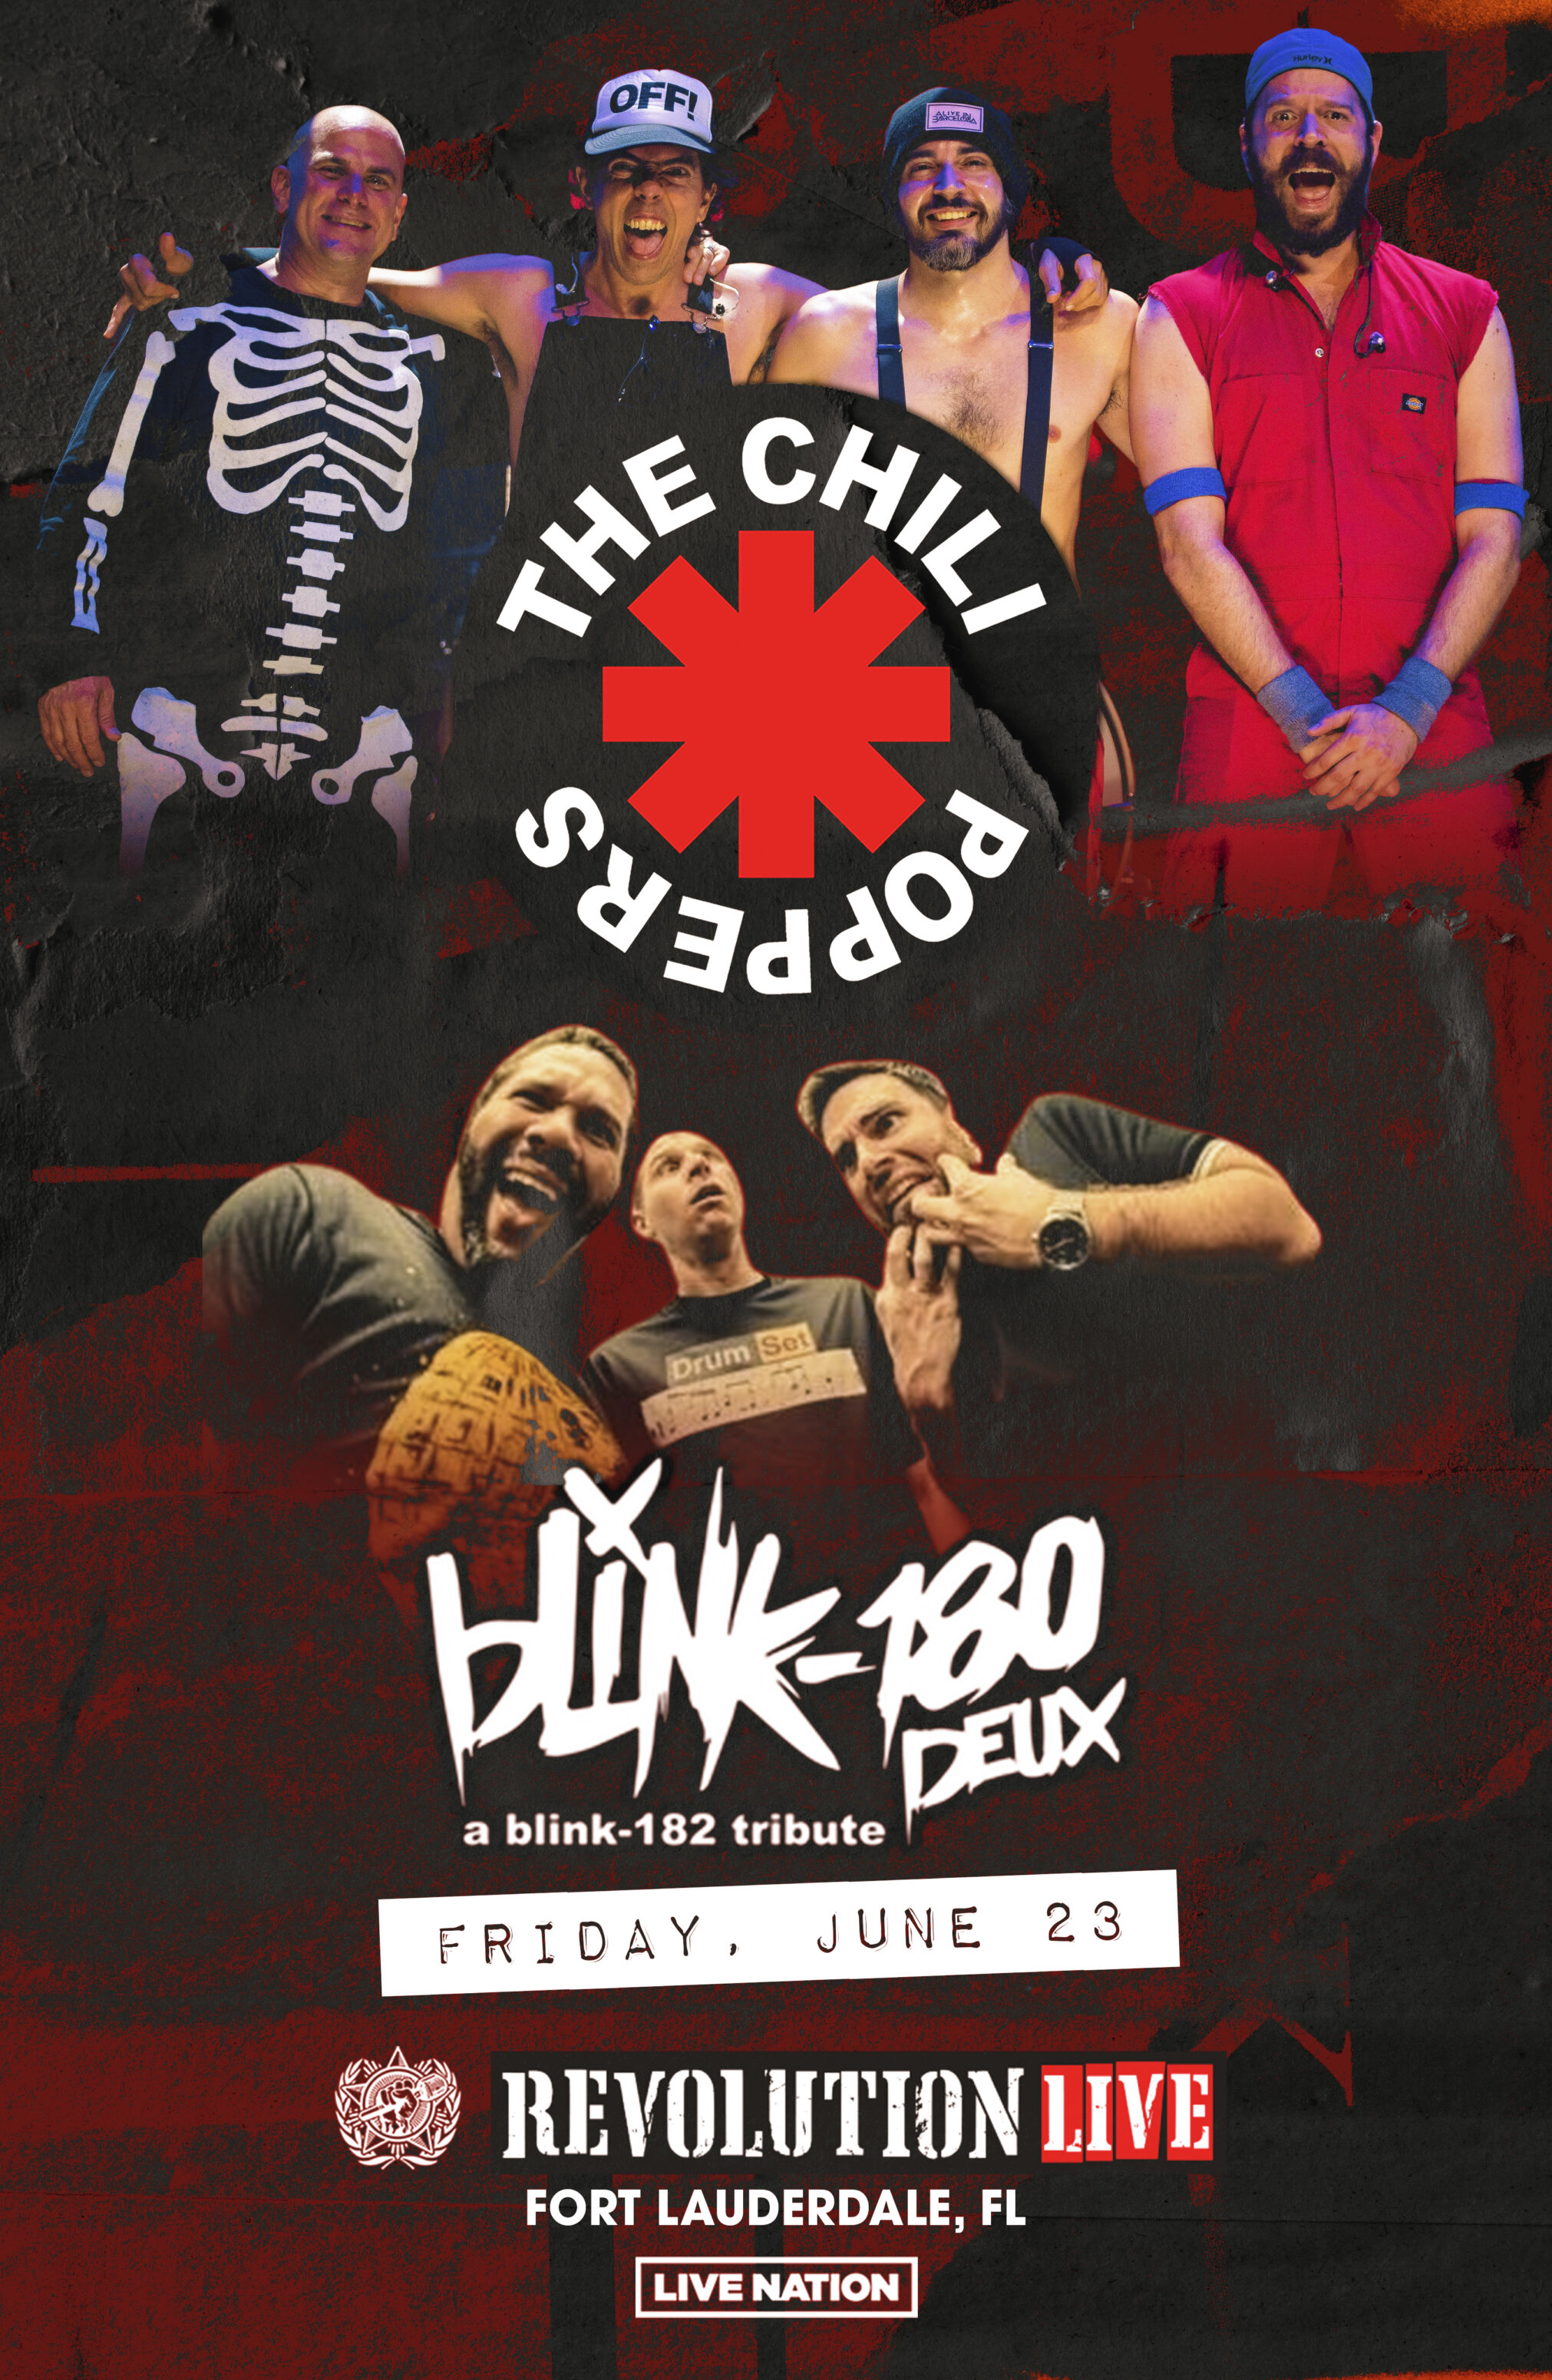 The Chili Poppers and Blink 180-Deux